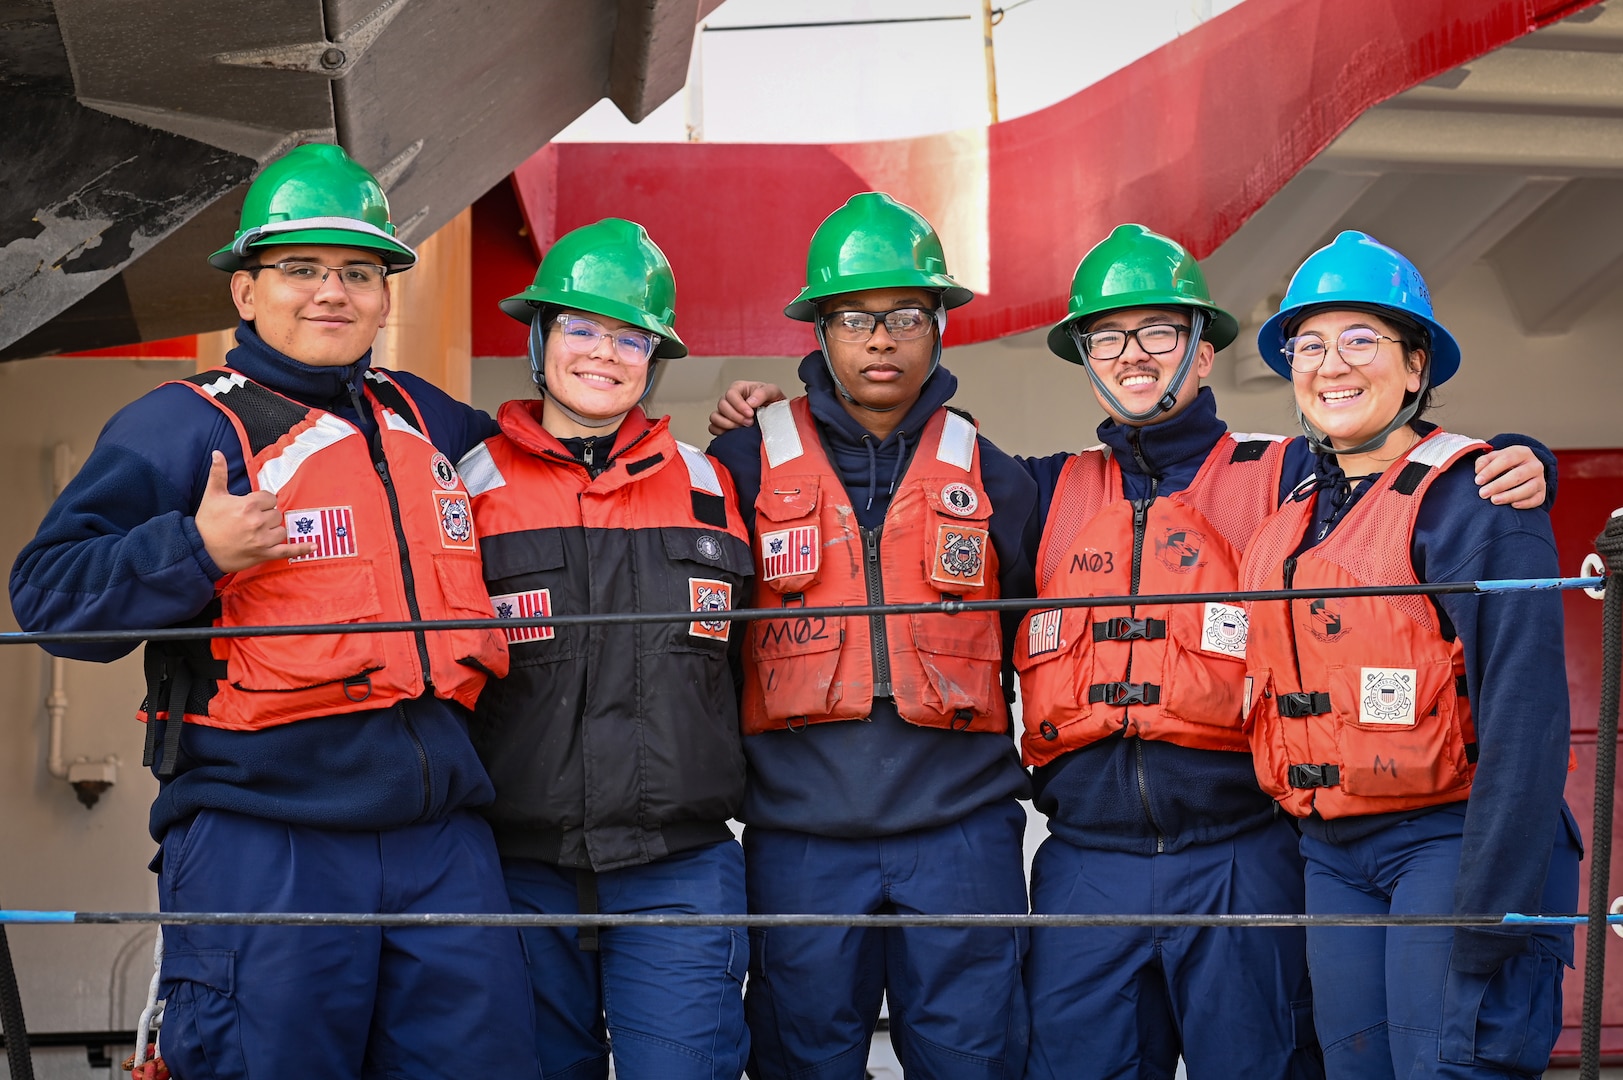 U.S. Coast Guard Cutter Polar Star's (WAGB 10) crew members deck department pose for a photo as the cutter begins to get underway from Base Seattle, Nov. 15, 2023. The crew is scheduled to deploy for several months in support of Operation Deep Freeze, a mission that enables the delivery of critical supplies to sustain the U.S. Antarctic Program’s year-round operations. (U.S. Coast Guard photo by Petty Officer Steve Strohmaier)